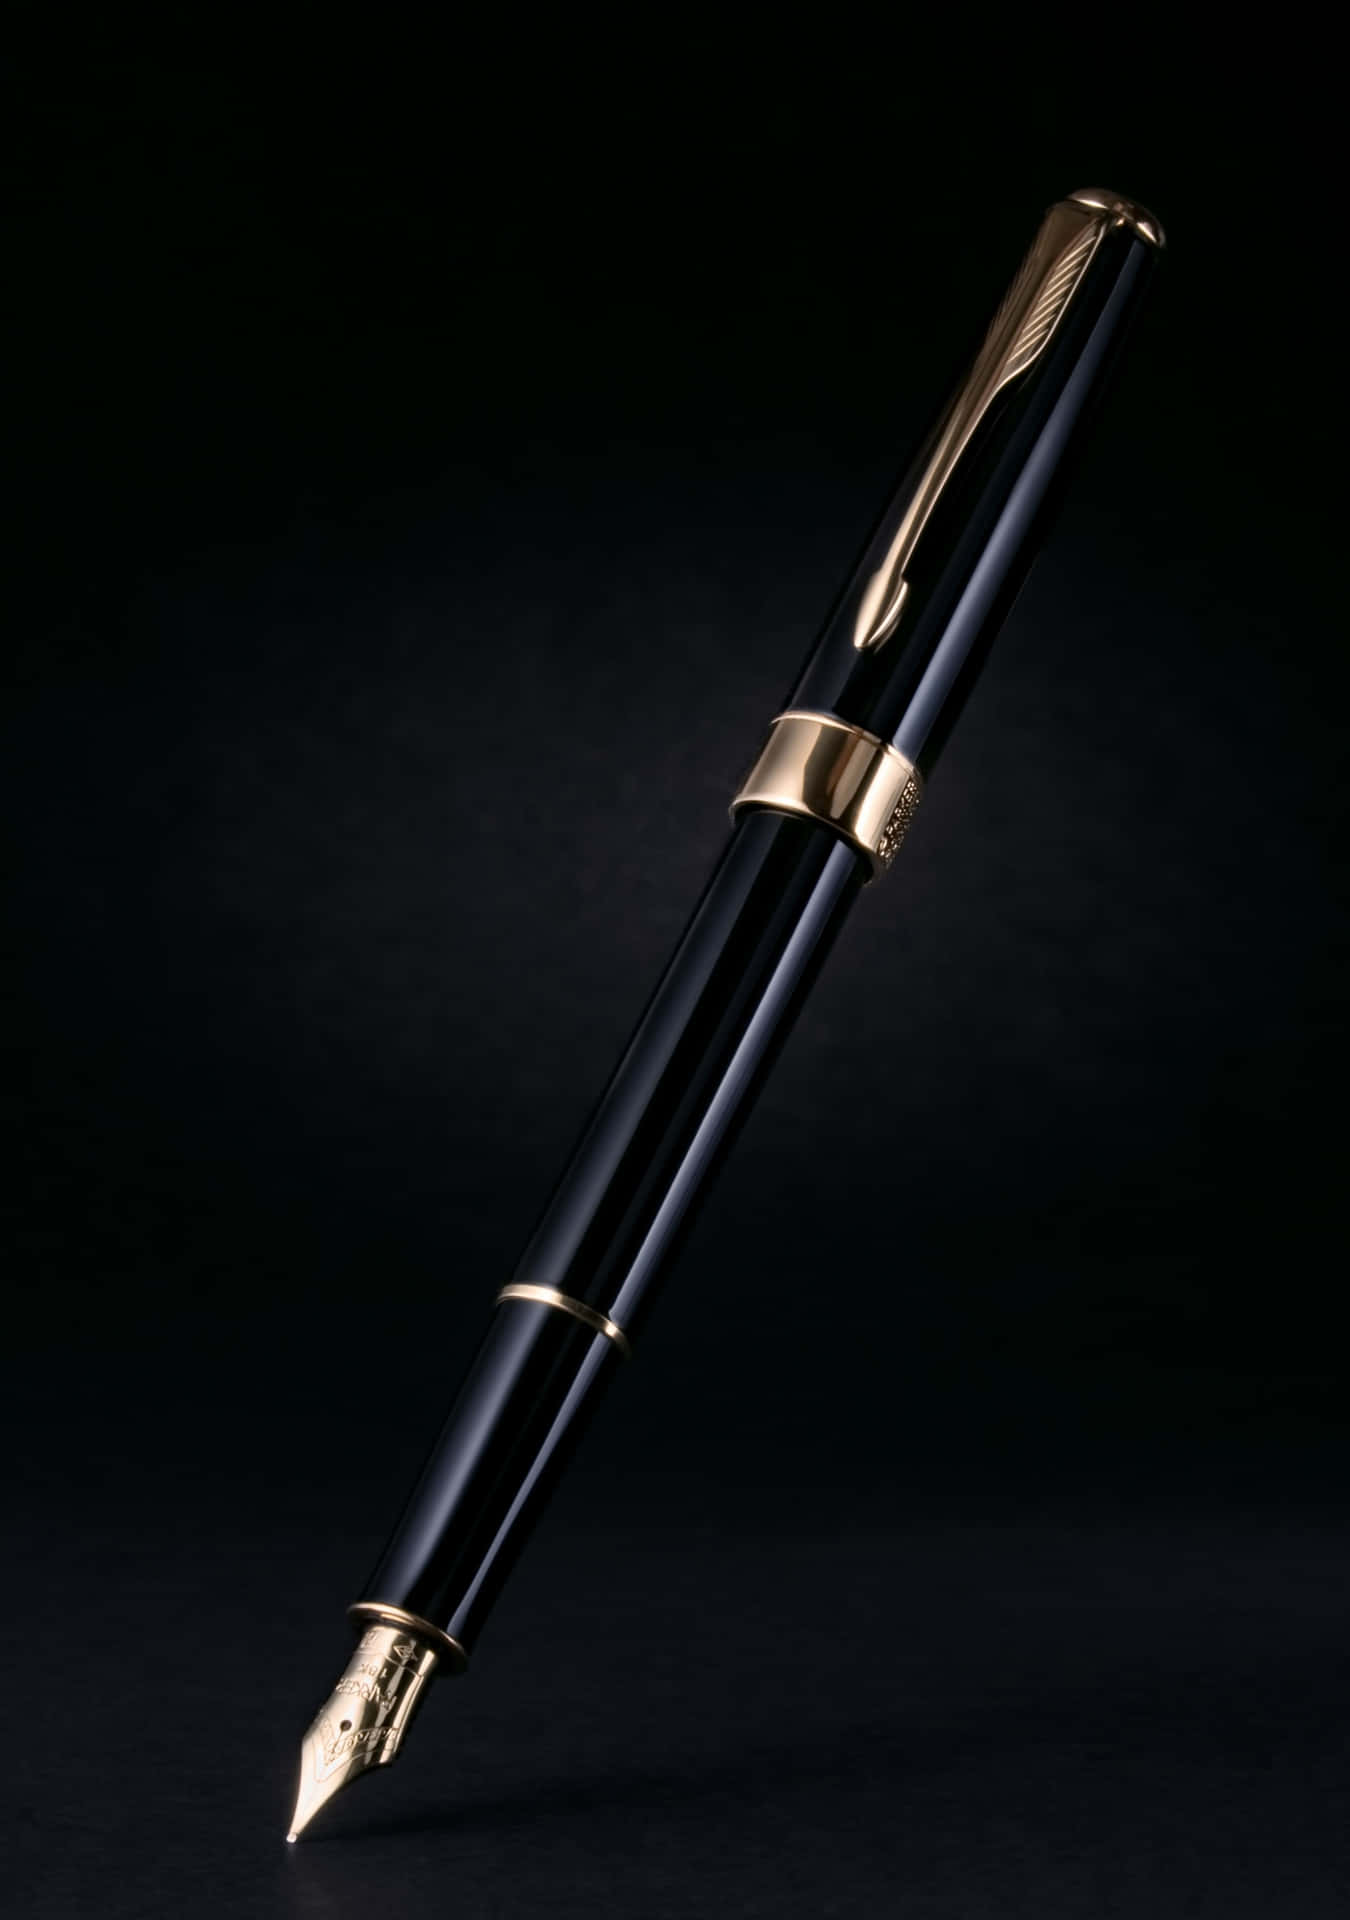 A Black And Gold Fountain Pen On A Black Background